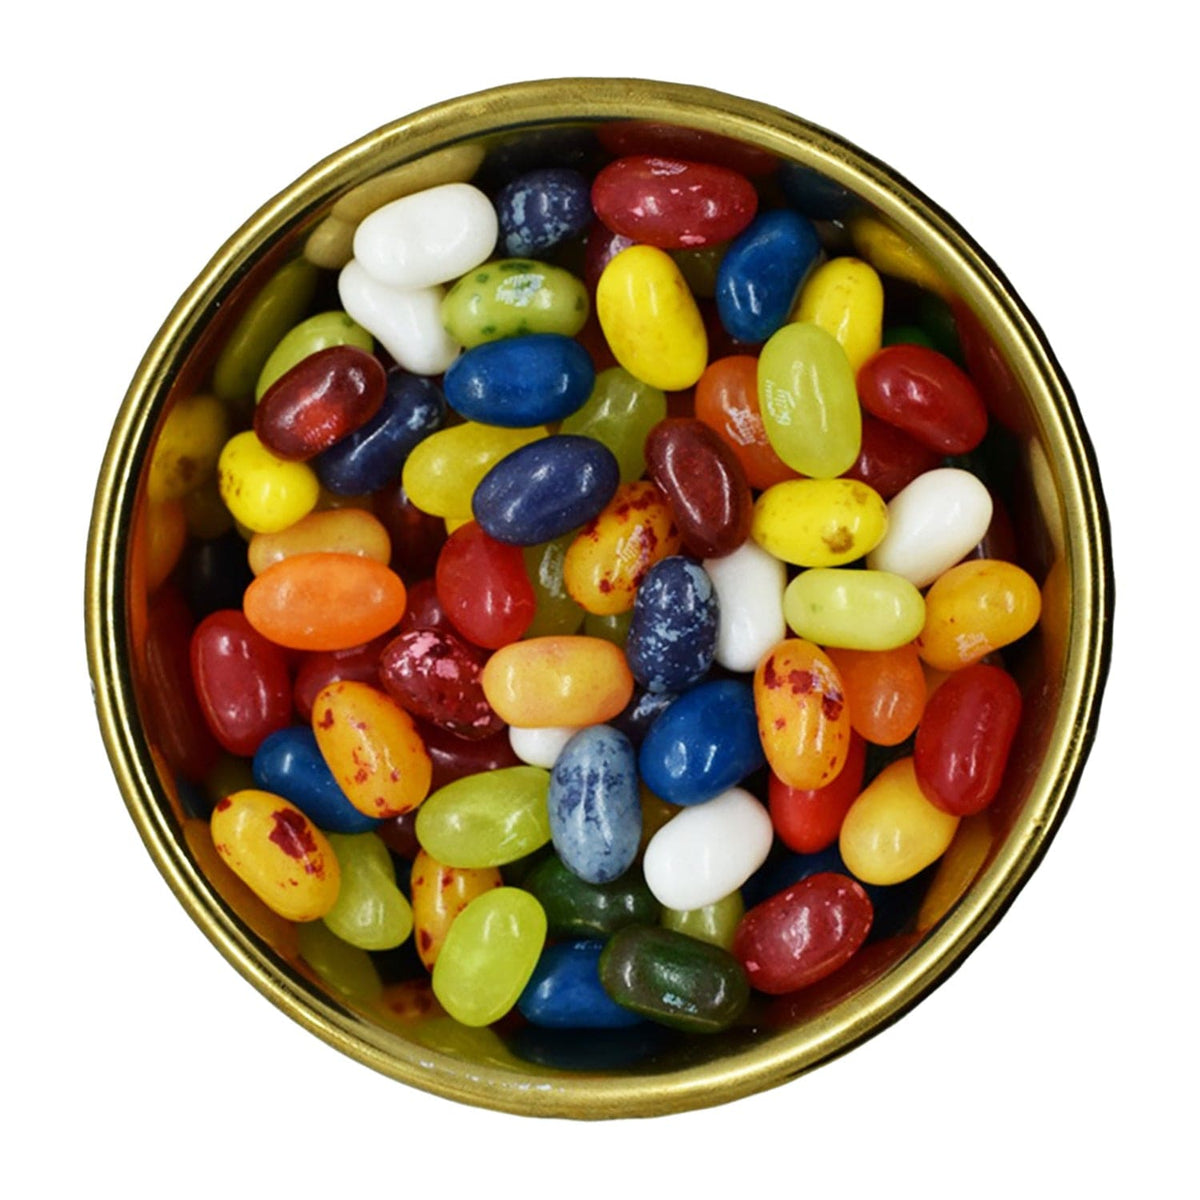 Lolli and Pops Bulk Jelly Belly Fruit Bowl Jelly Beans